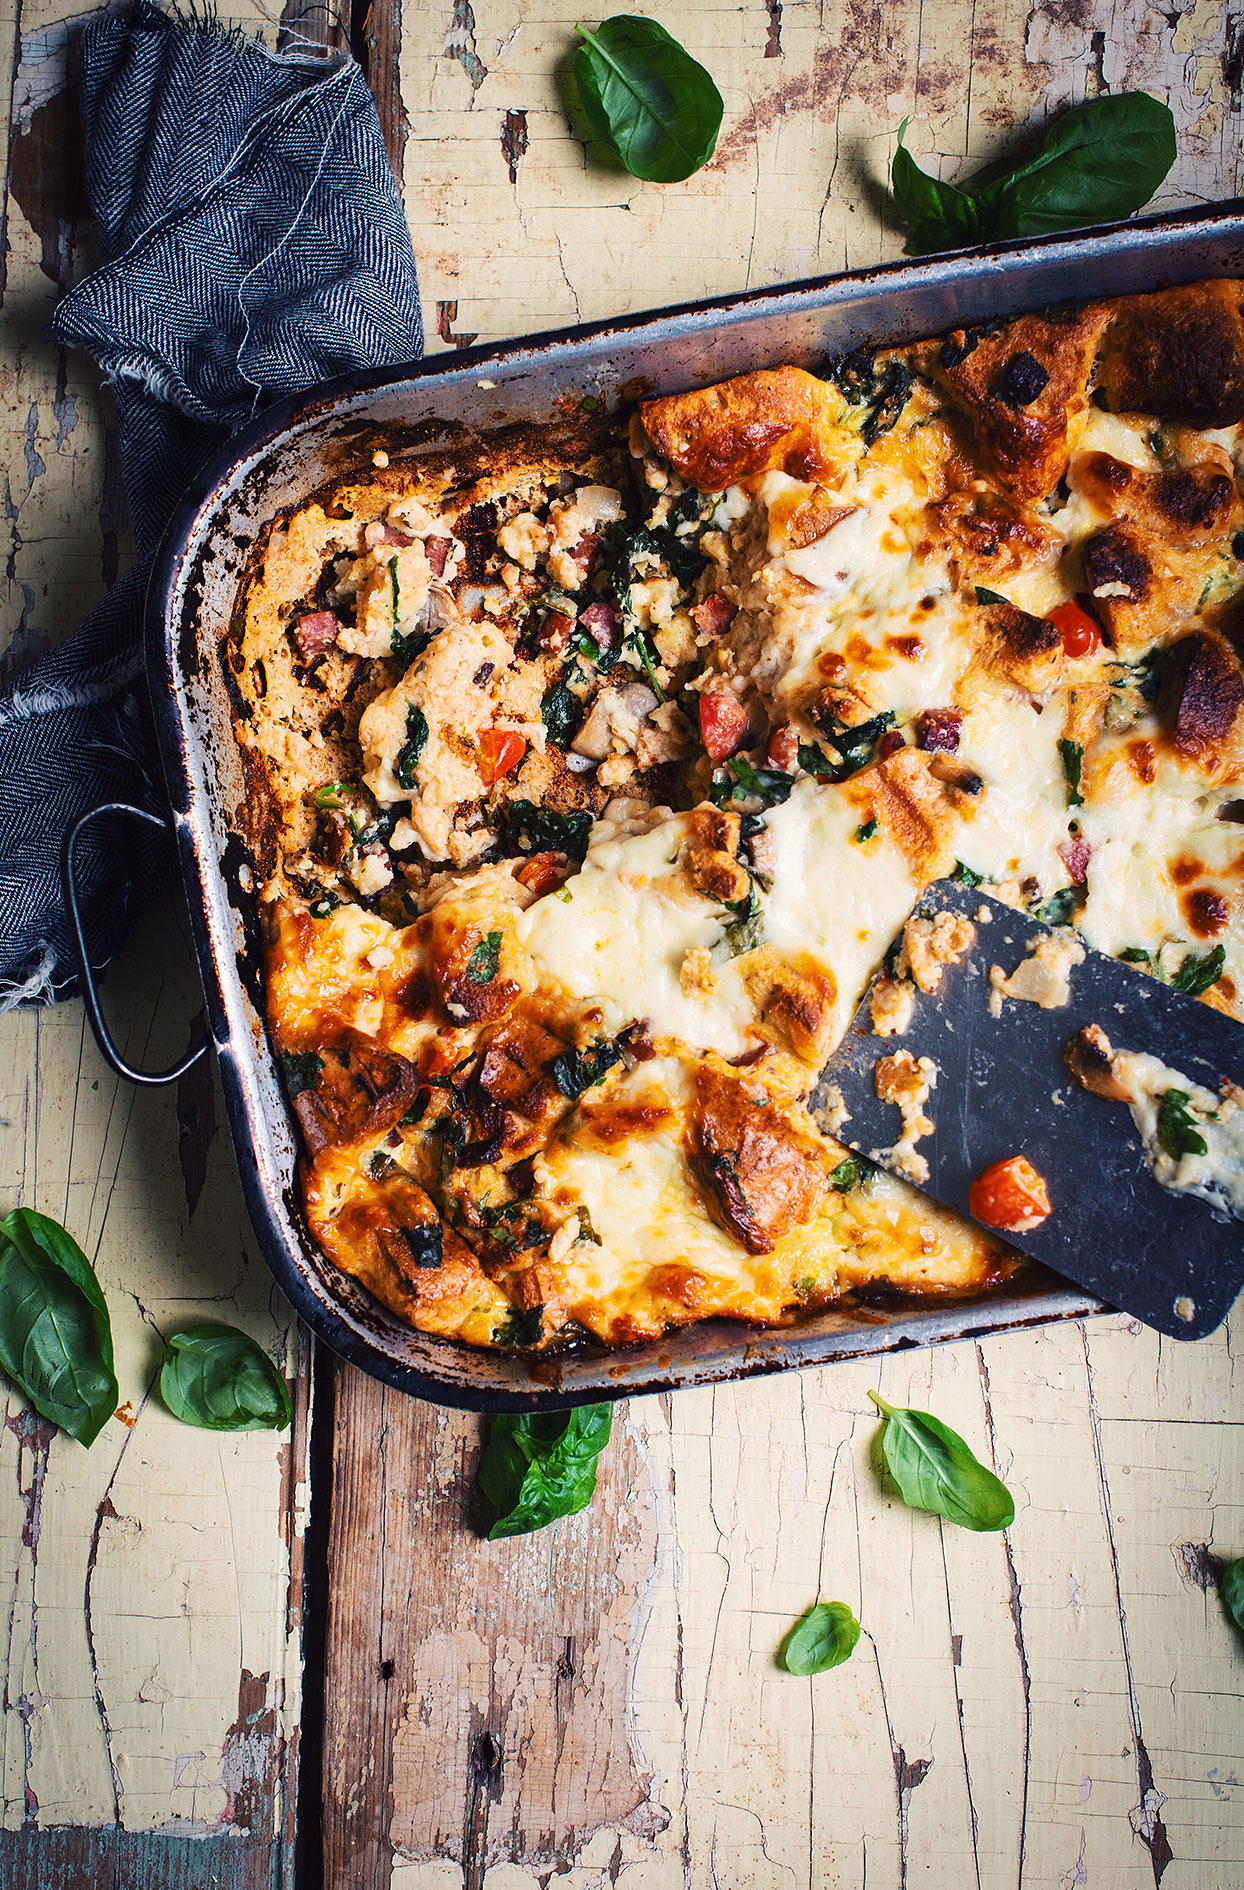 Cheesy strata with bagels, dried sausage and spinach